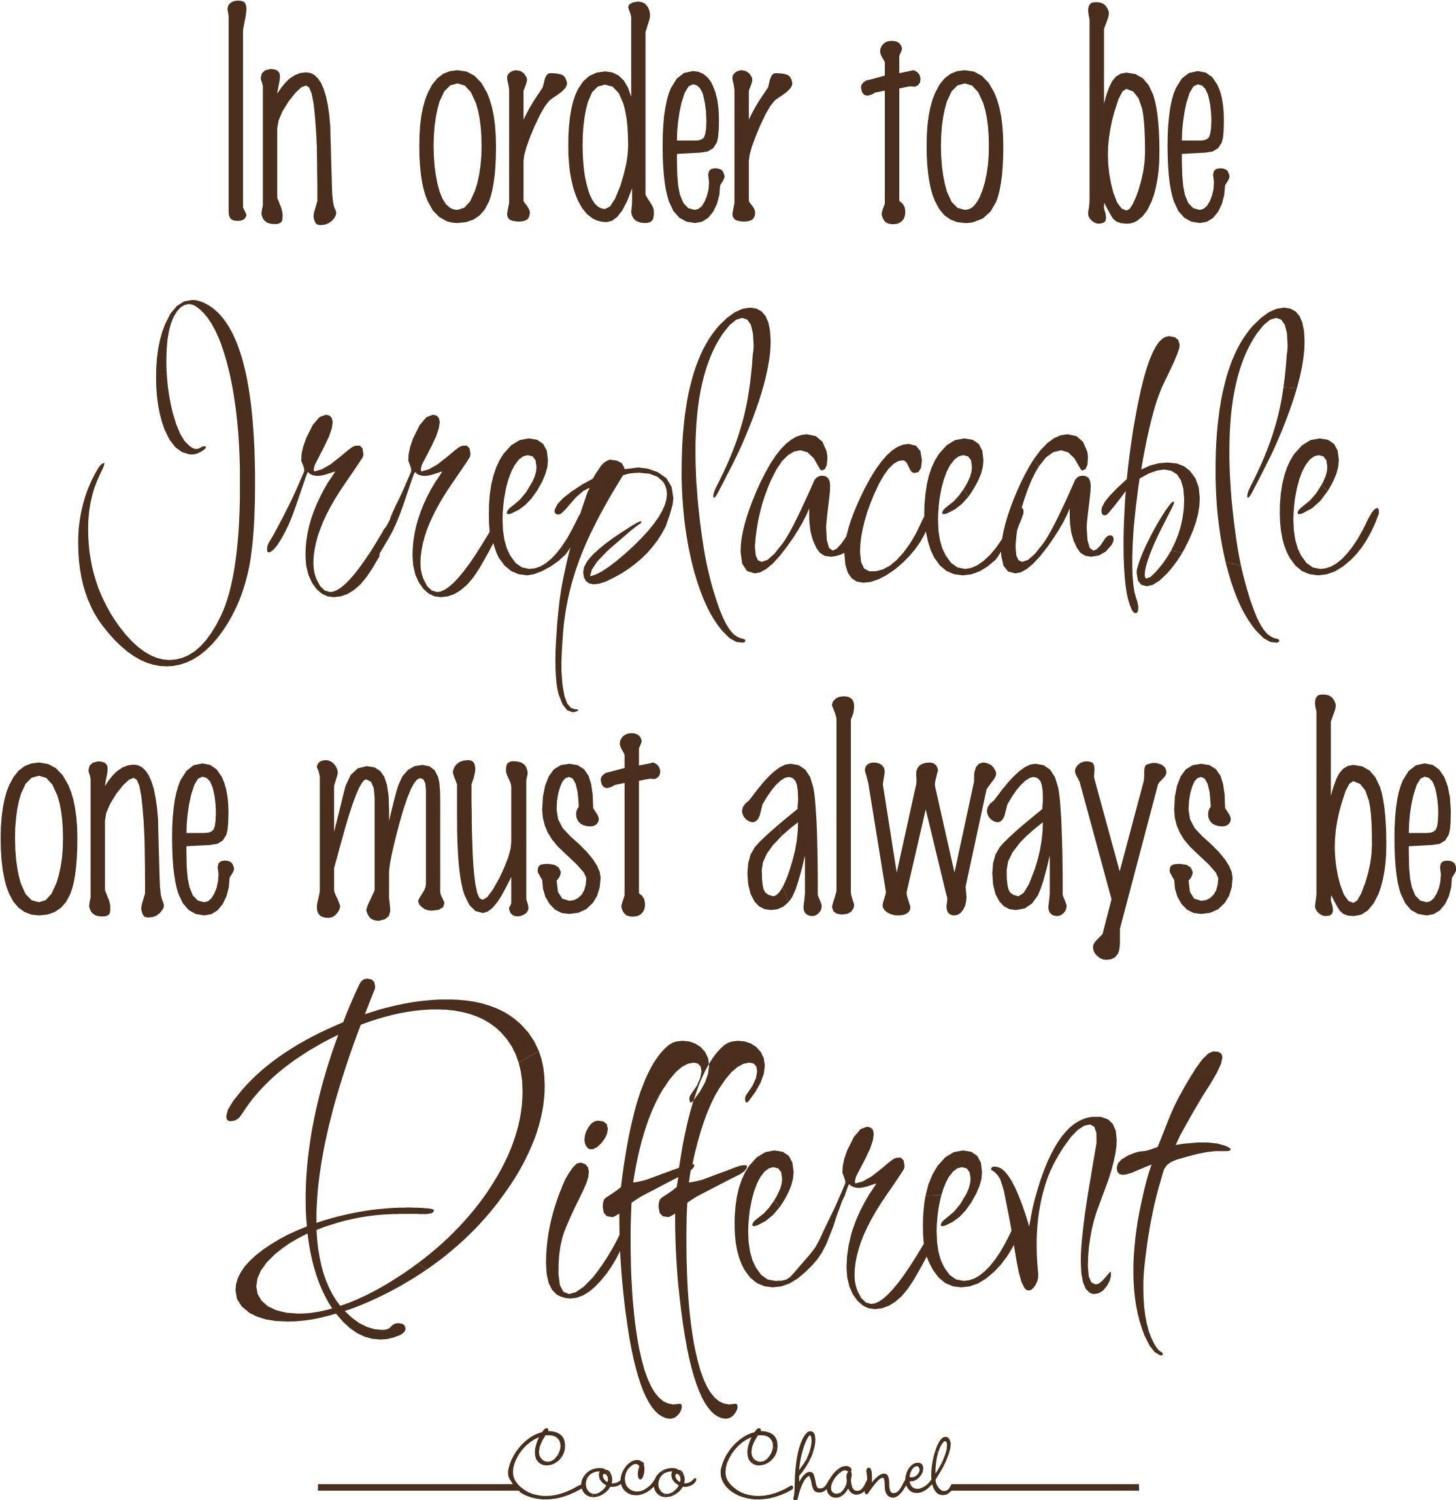 quote-about-in-order-to-be-irreplaceable-one-must-always-be